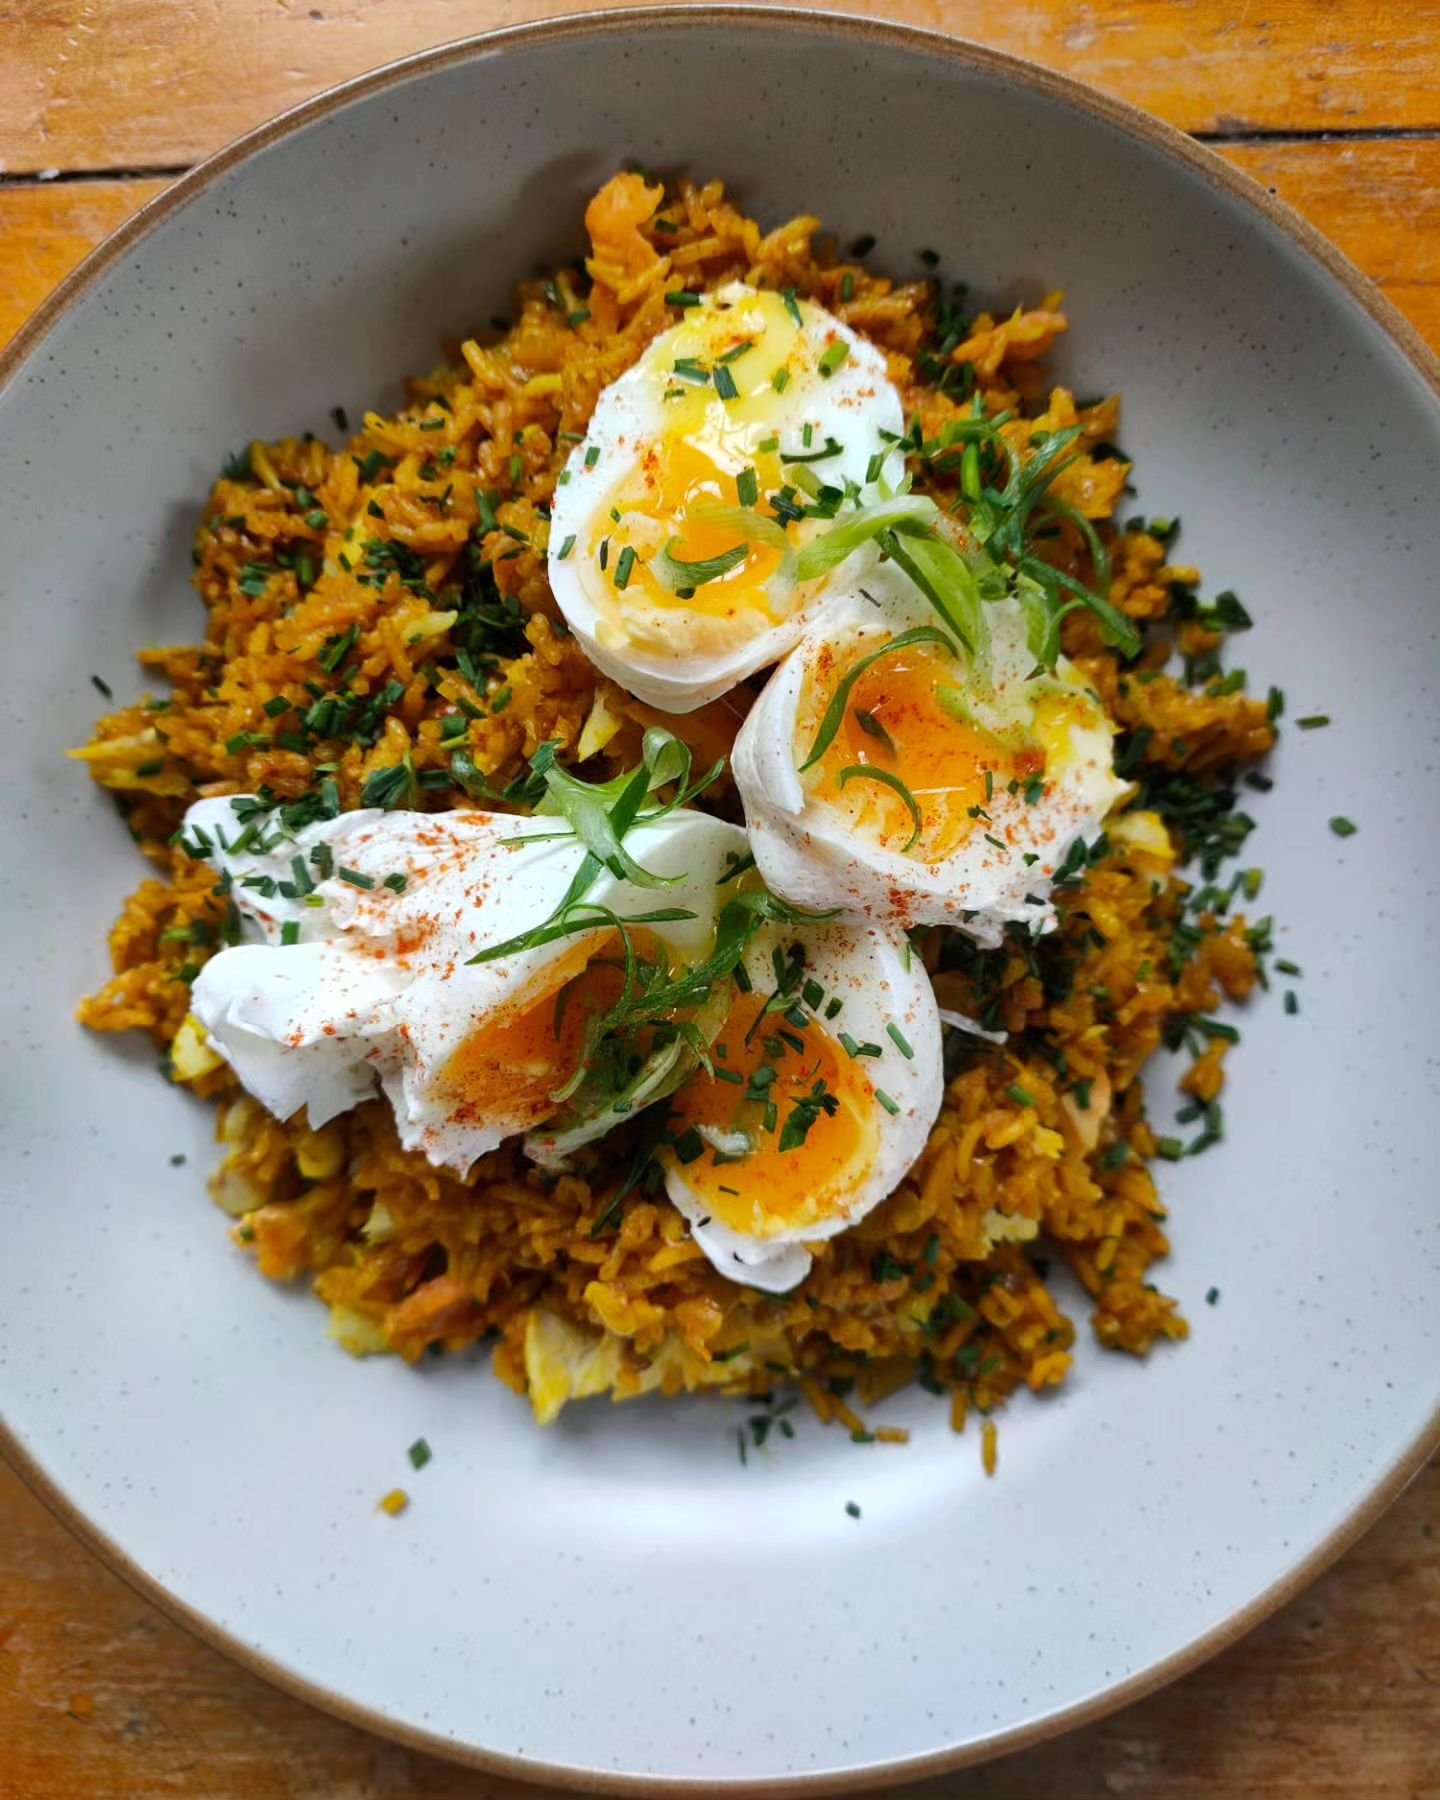 This week on our specials...

Smoked salmon and cod kedgeree, poached eggs and chives 🤤

Brunch and lunch served bank holiday Monday 9am-3pm and the rest of the week 8.30am-3pm

Happy bank holiday weekend 💛
.
.
.
#specials #kedgeree #smokedsalmon #